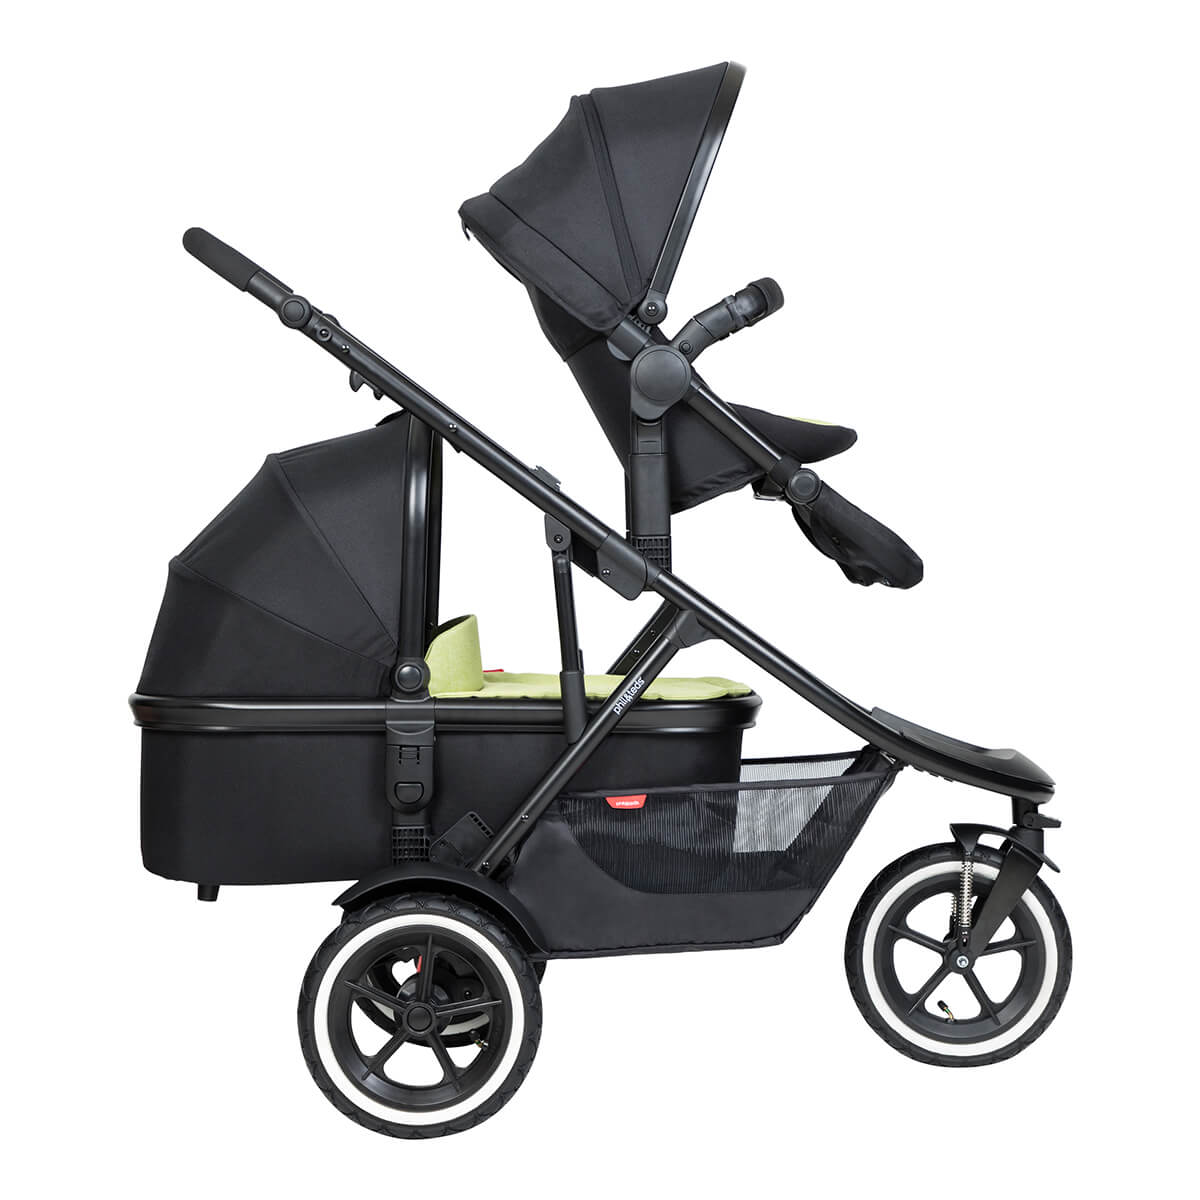 https://cdn.accentuate.io/7749831459010/19466204250306/philteds-sport-buggy-with-double-kit-extended-clip-and-snug-carrycot-side-view-v1700693413406.jpg?1200x1200